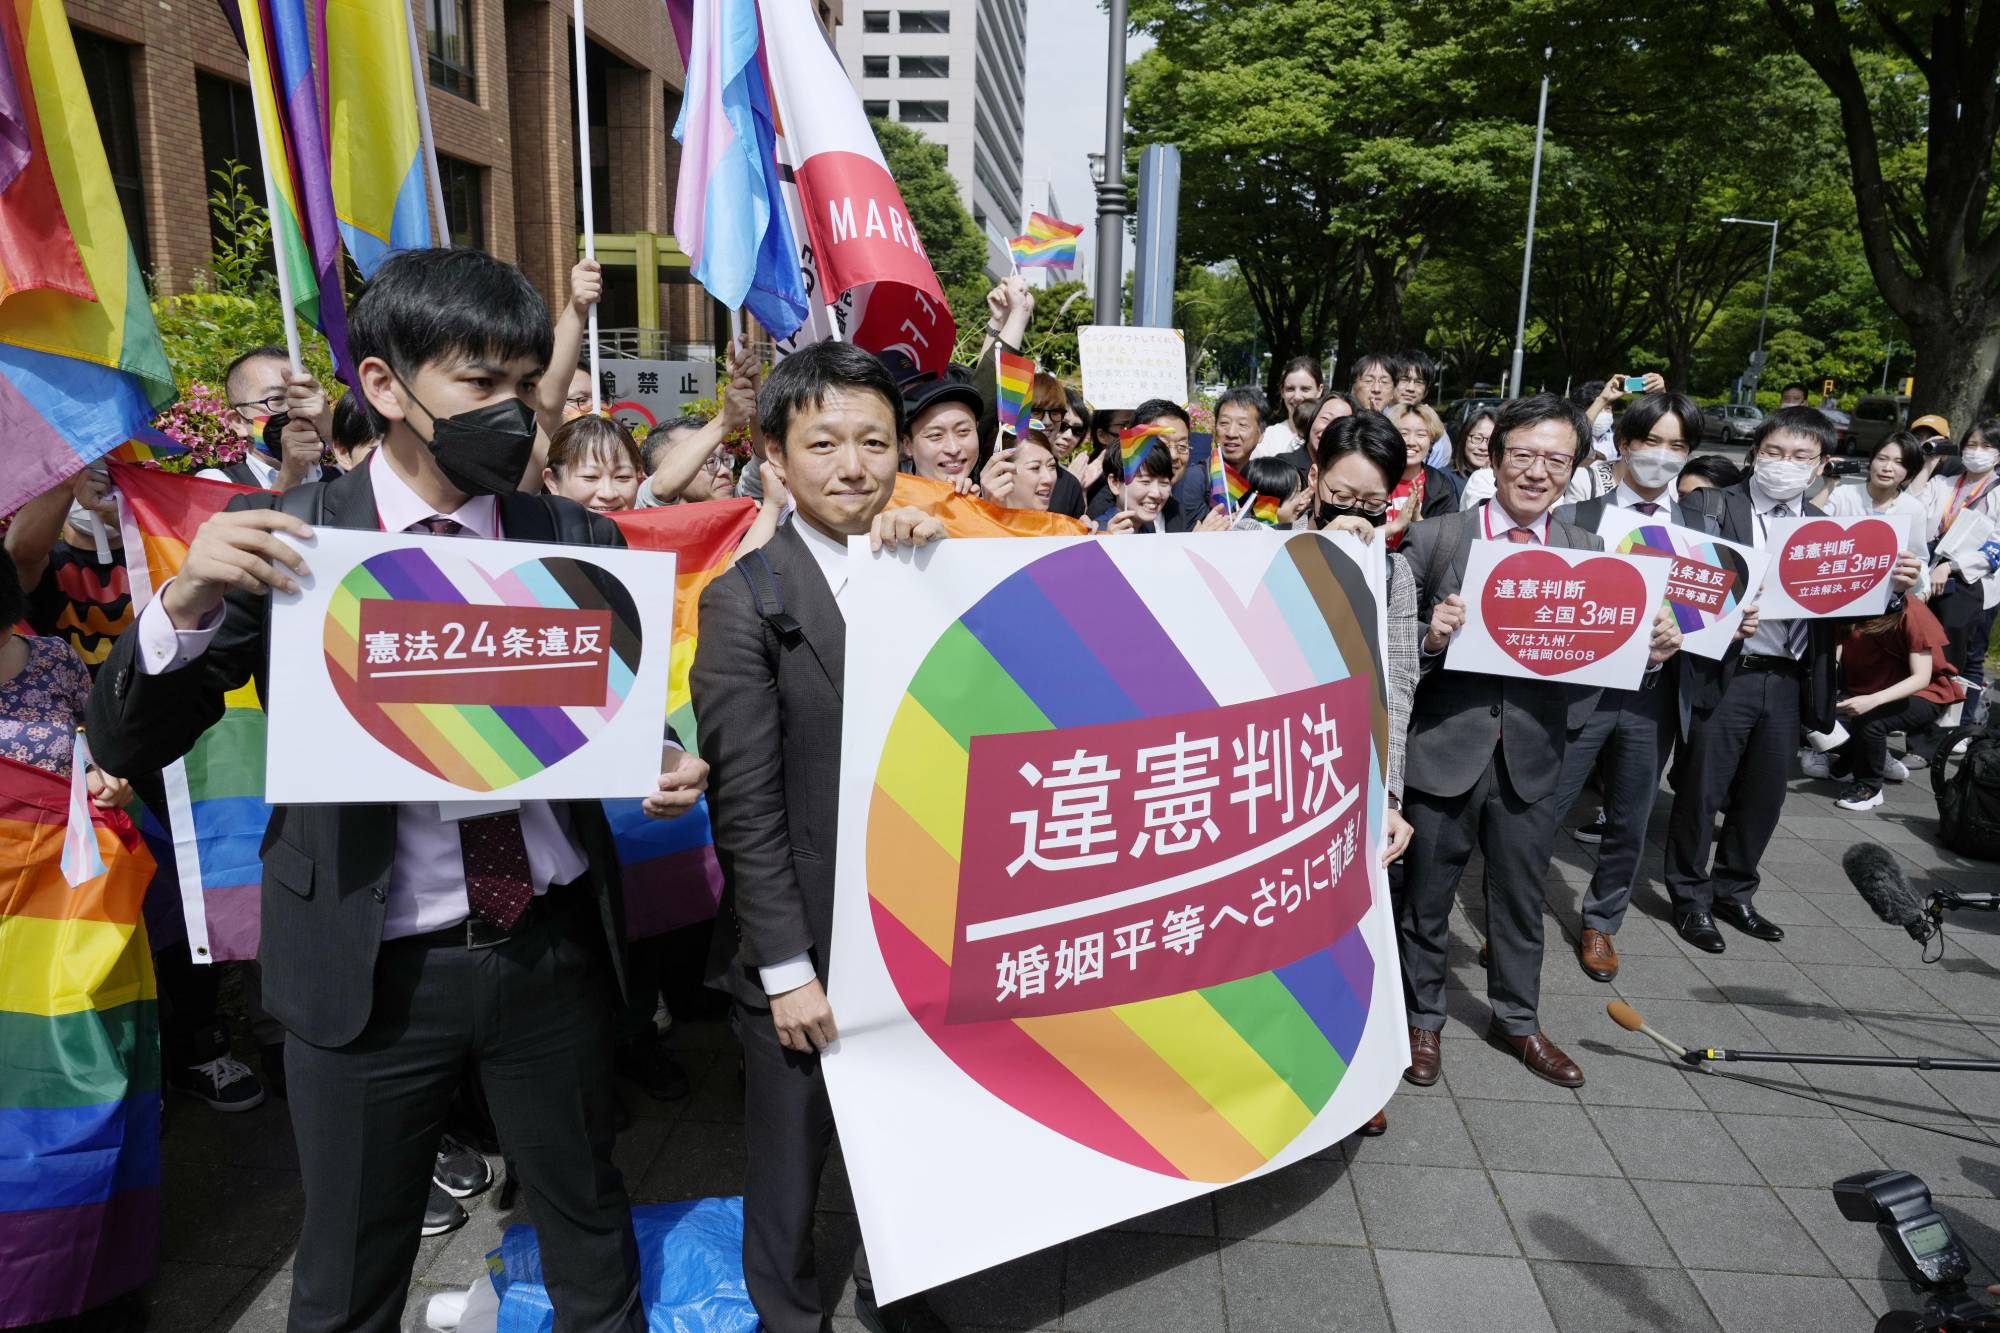 Lawyers for the plaintiffs hold signs Tuesday outside the Nagoya District Court after its ruling that not allowing same-sex marriage is unconstitutional. | KYODO